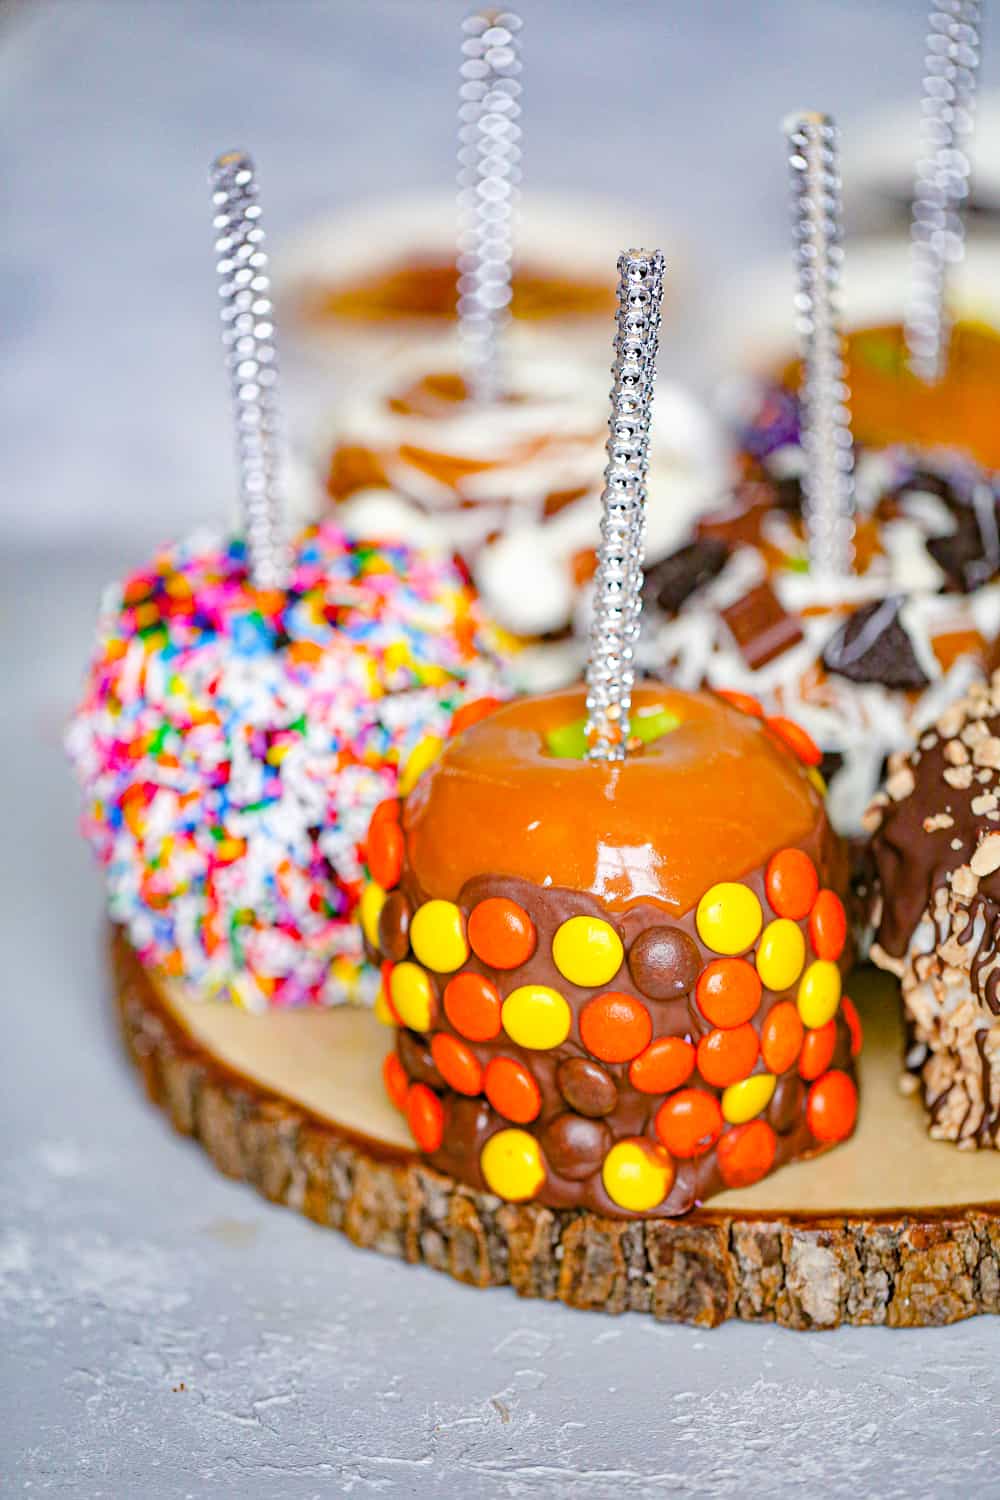 Serving Chocolate Caramel Covered Apples